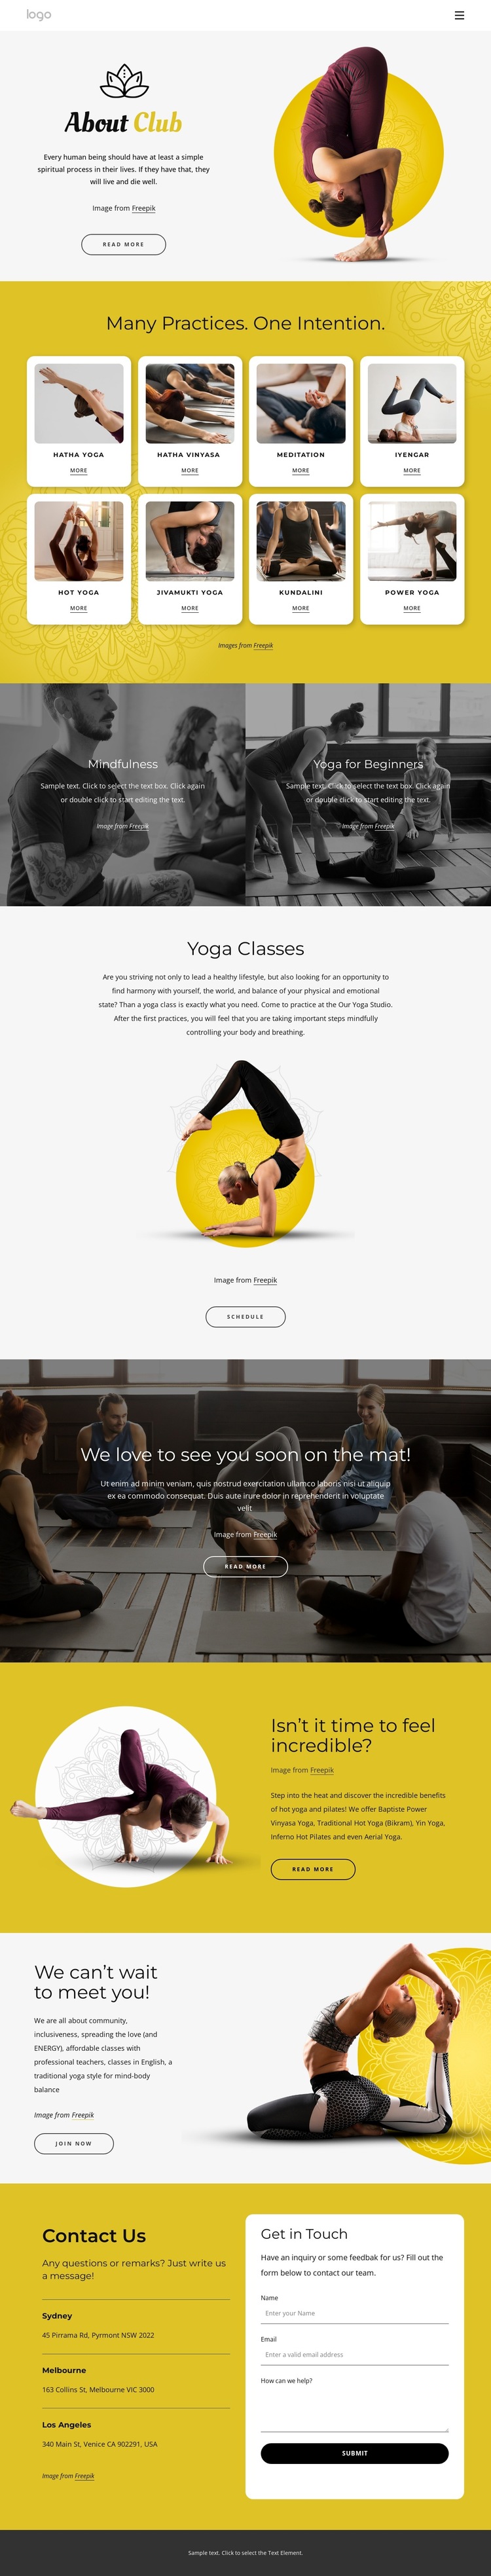 Physical, ethical and spiritual practice HTML5 Template